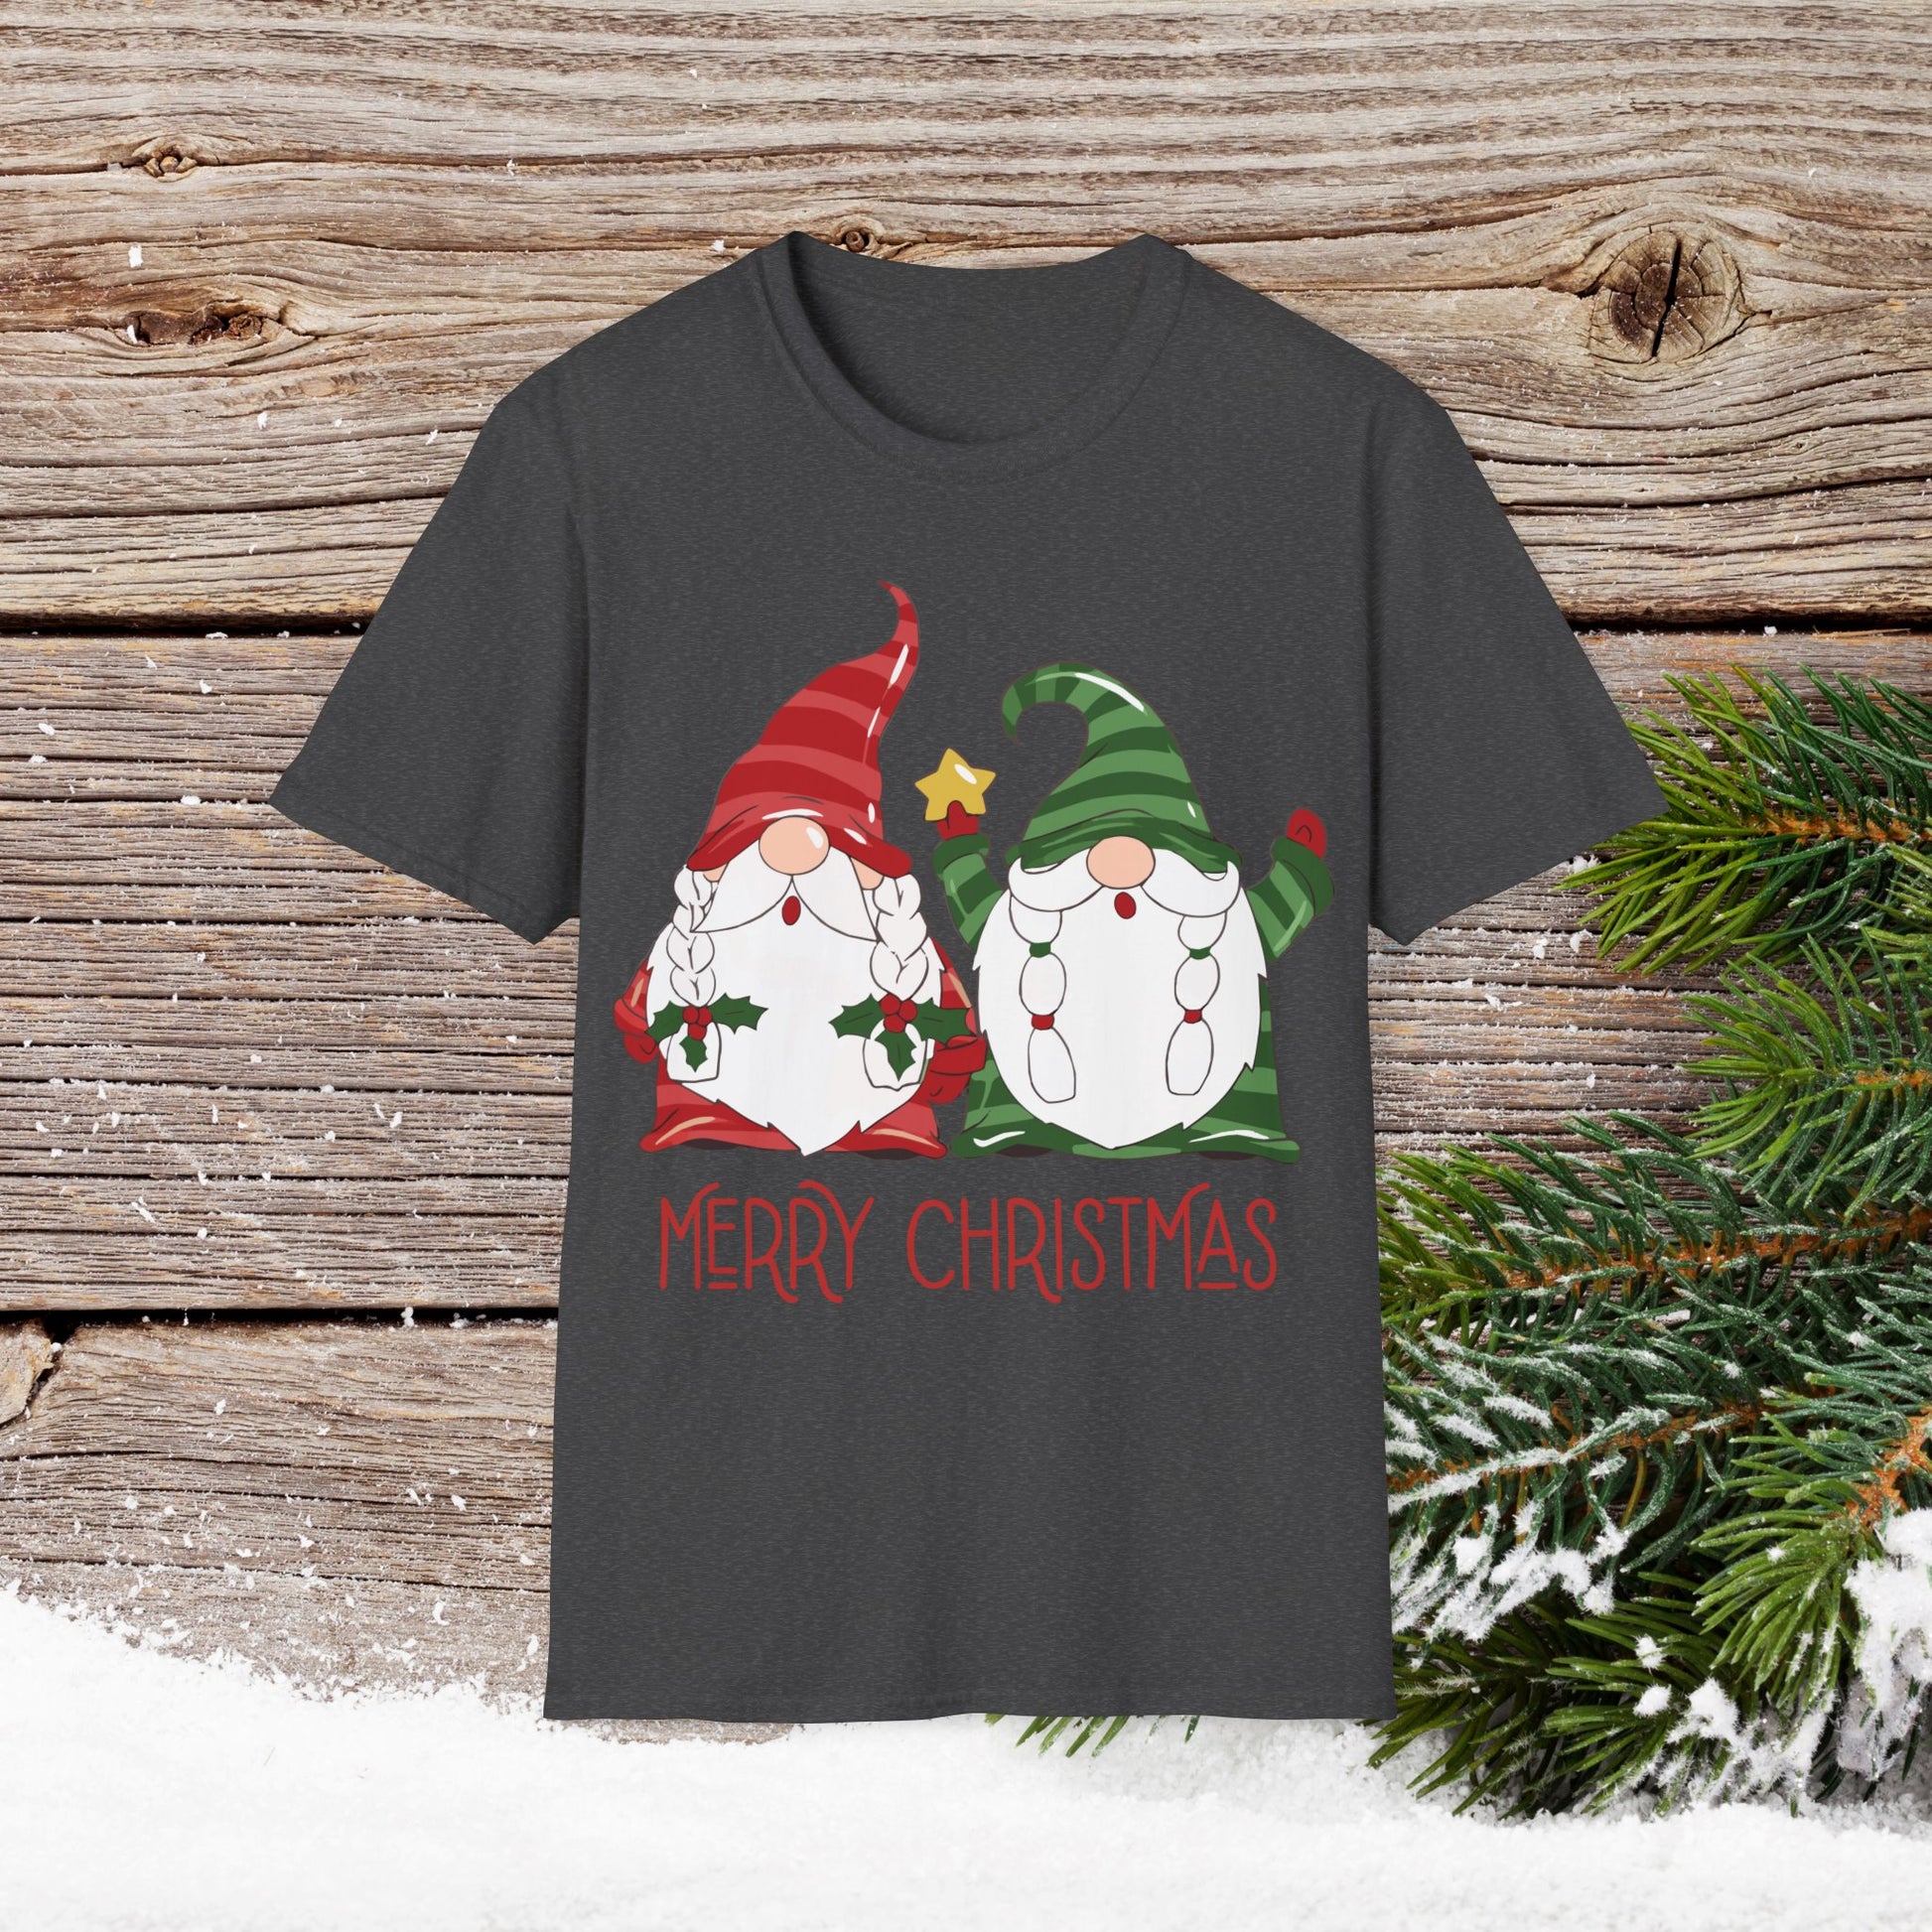 Christmas T-Shirt - Gnome Merry Christmas - Cute Christmas Shirts - Youth and Adult Christmas TShirts T-Shirts Graphic Avenue Dark Heather Adult Small 